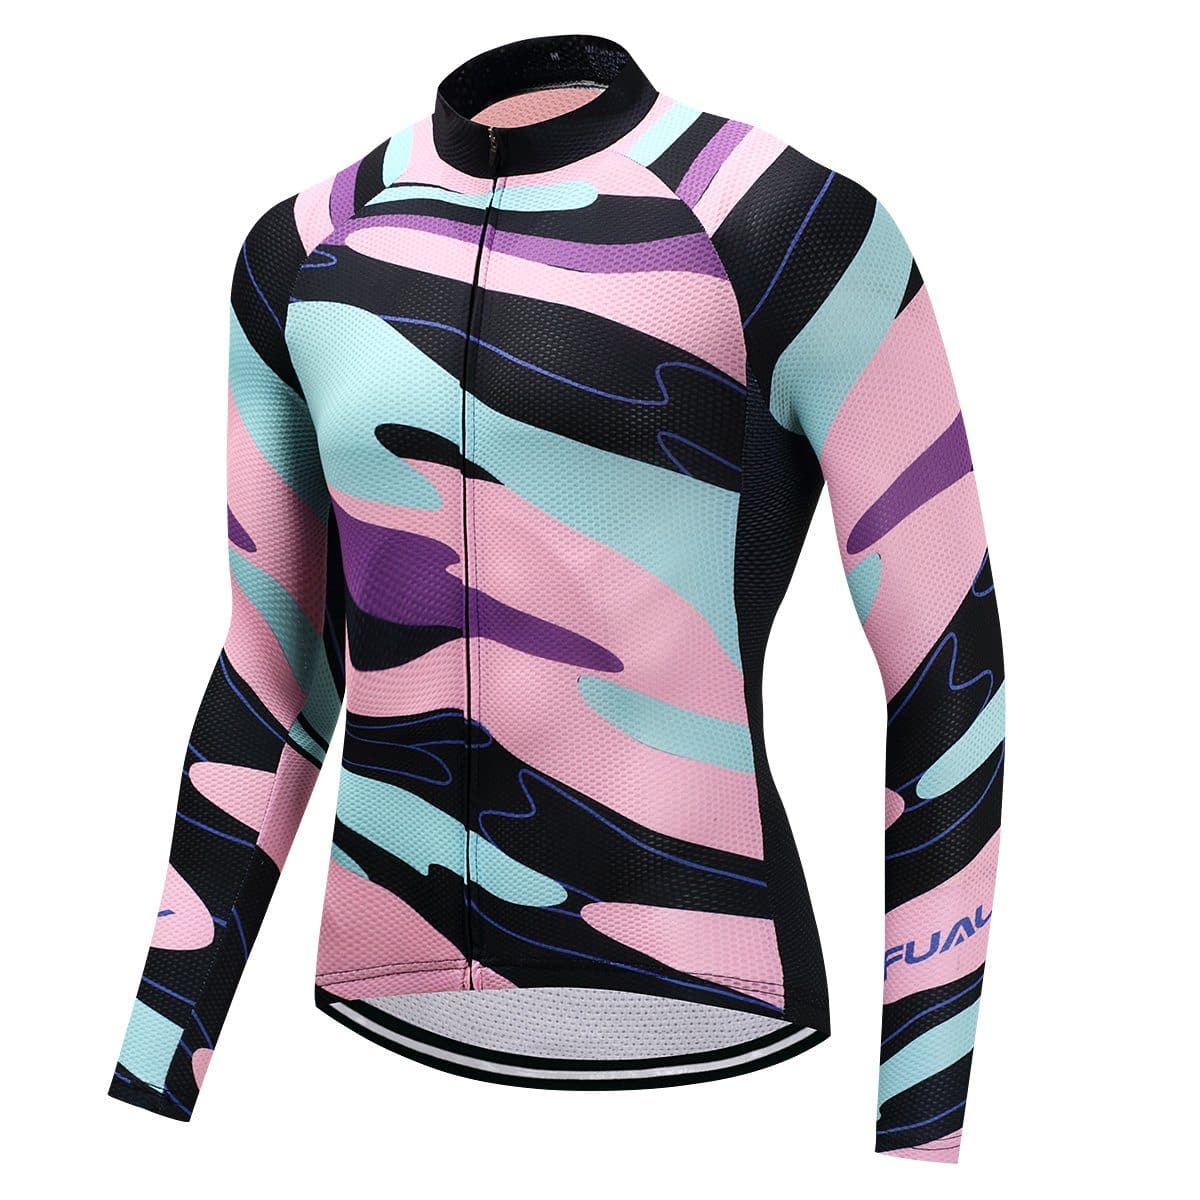 Thermal Cycling Jersey - Painted